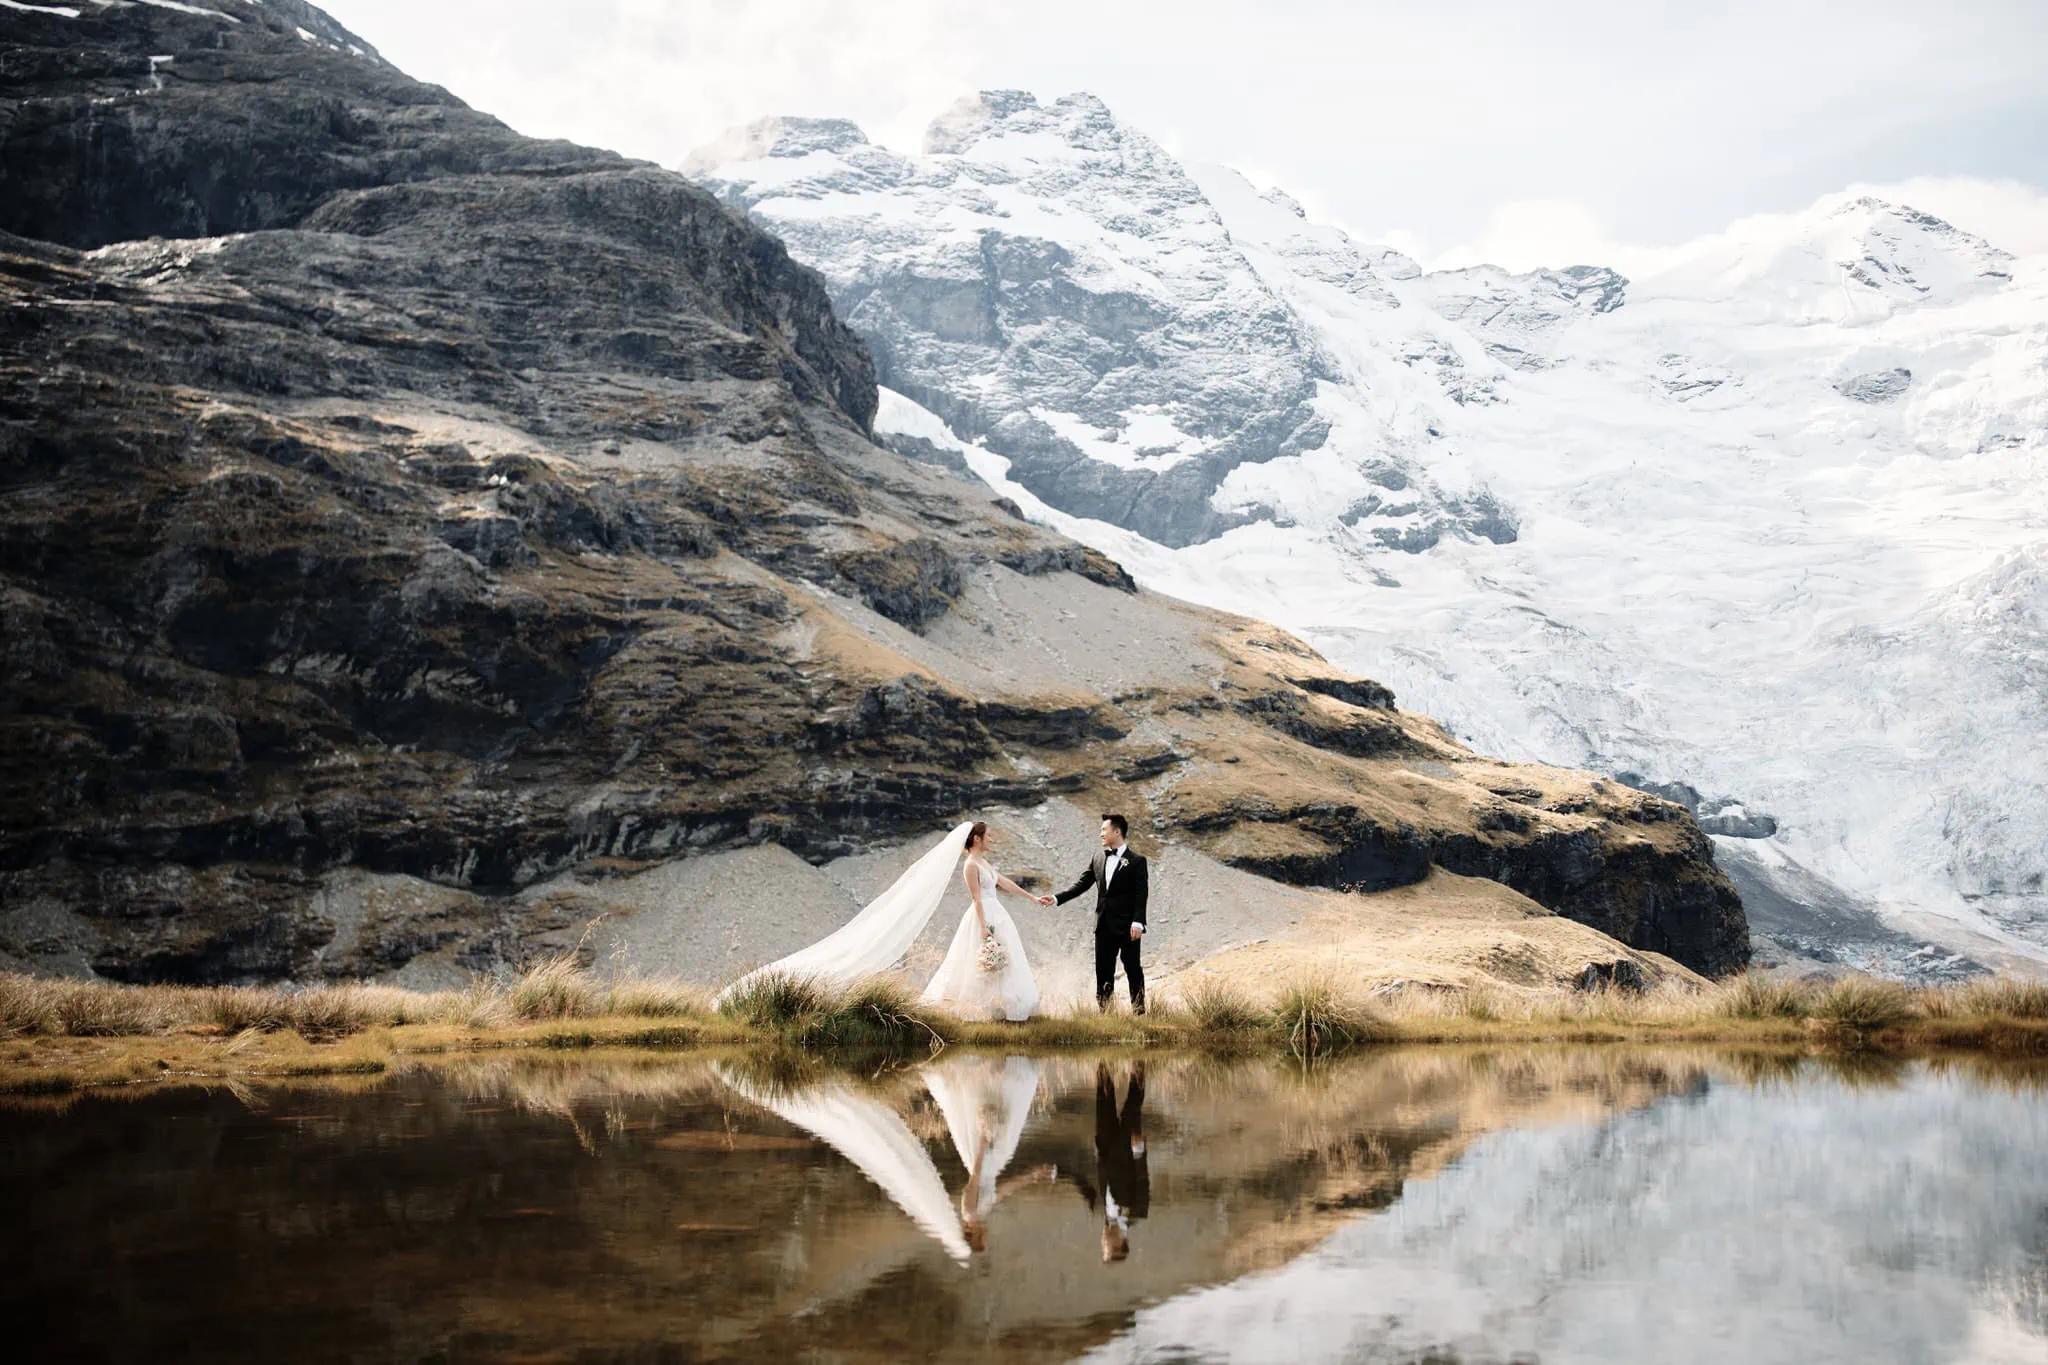 Queenstown New Zealand Elopement Wedding Photographer - A bride and groom posing for wedding photos in front of a scenic lake and mountains.